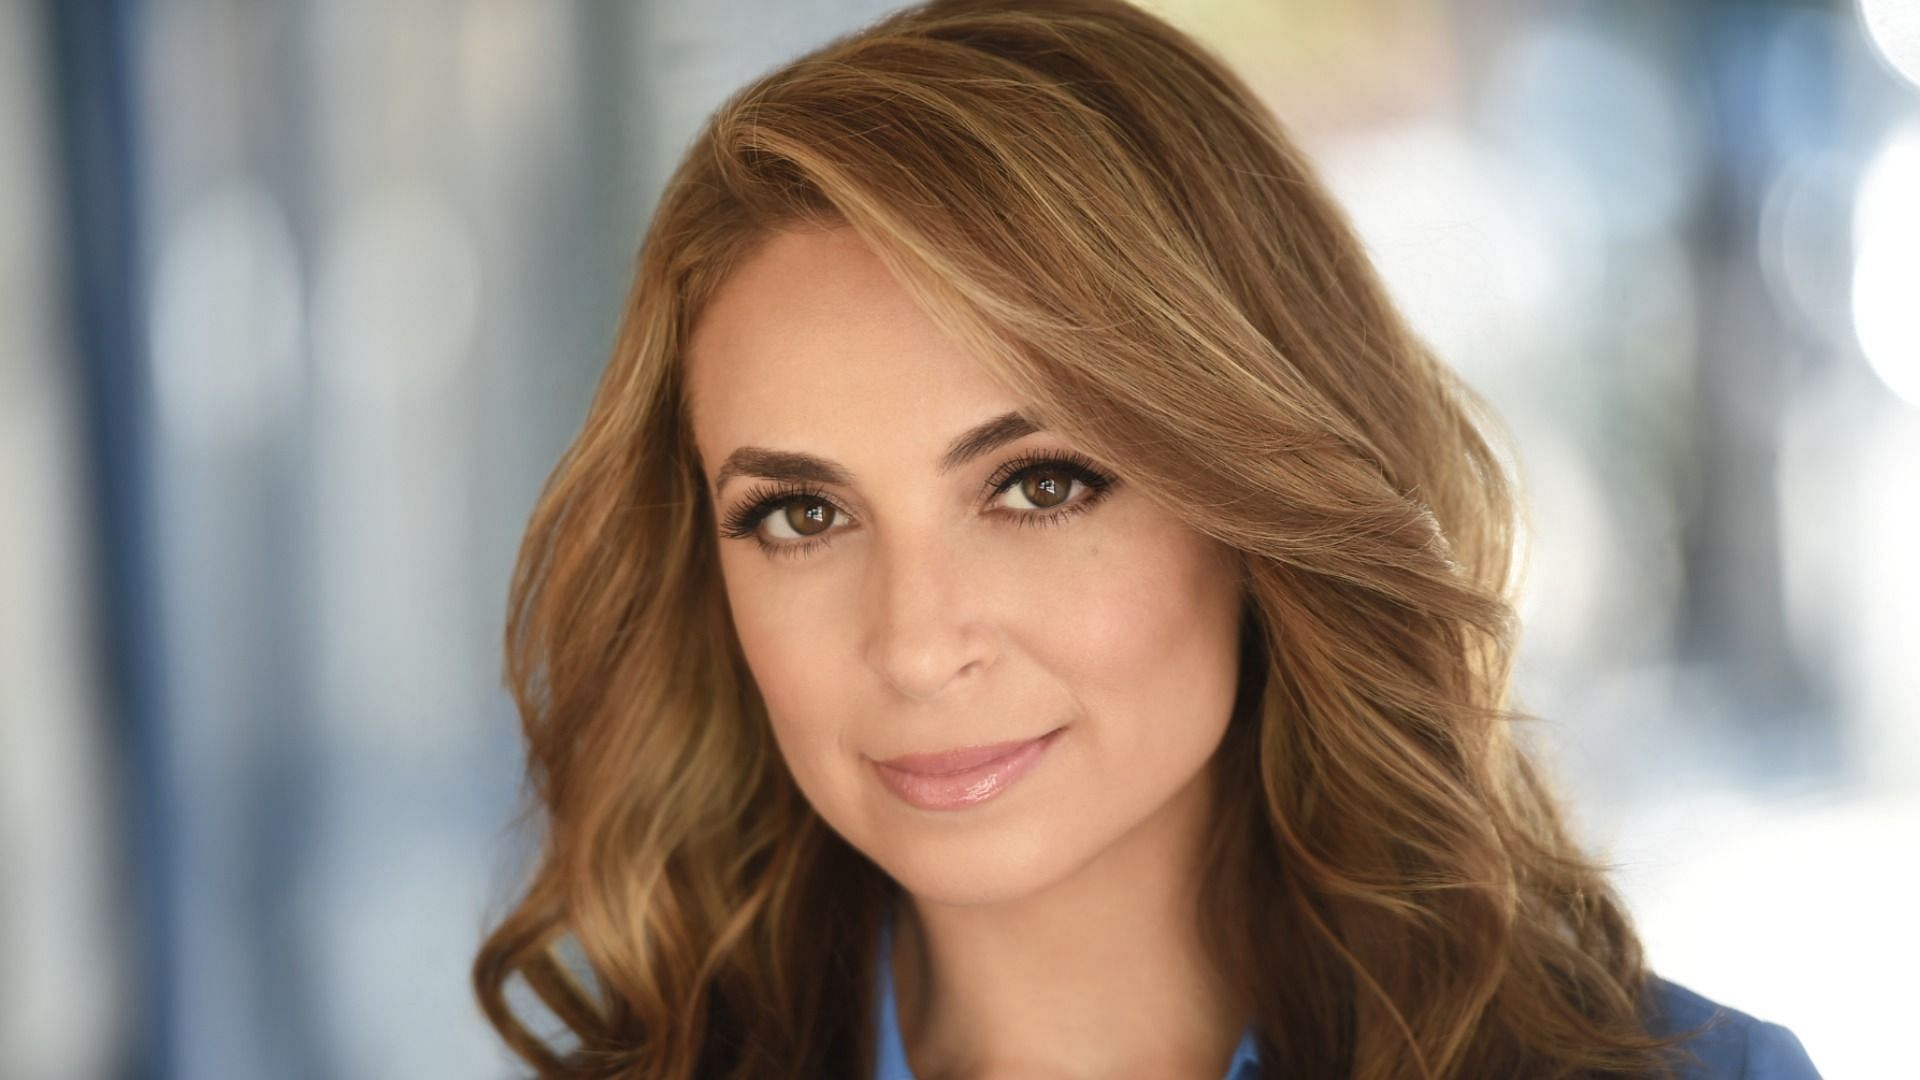 Jedediah Bila recently got into a heated conversation with Sunny Hostin over COVID-19 vaccine conspiracy theories (Image via Getty Images)